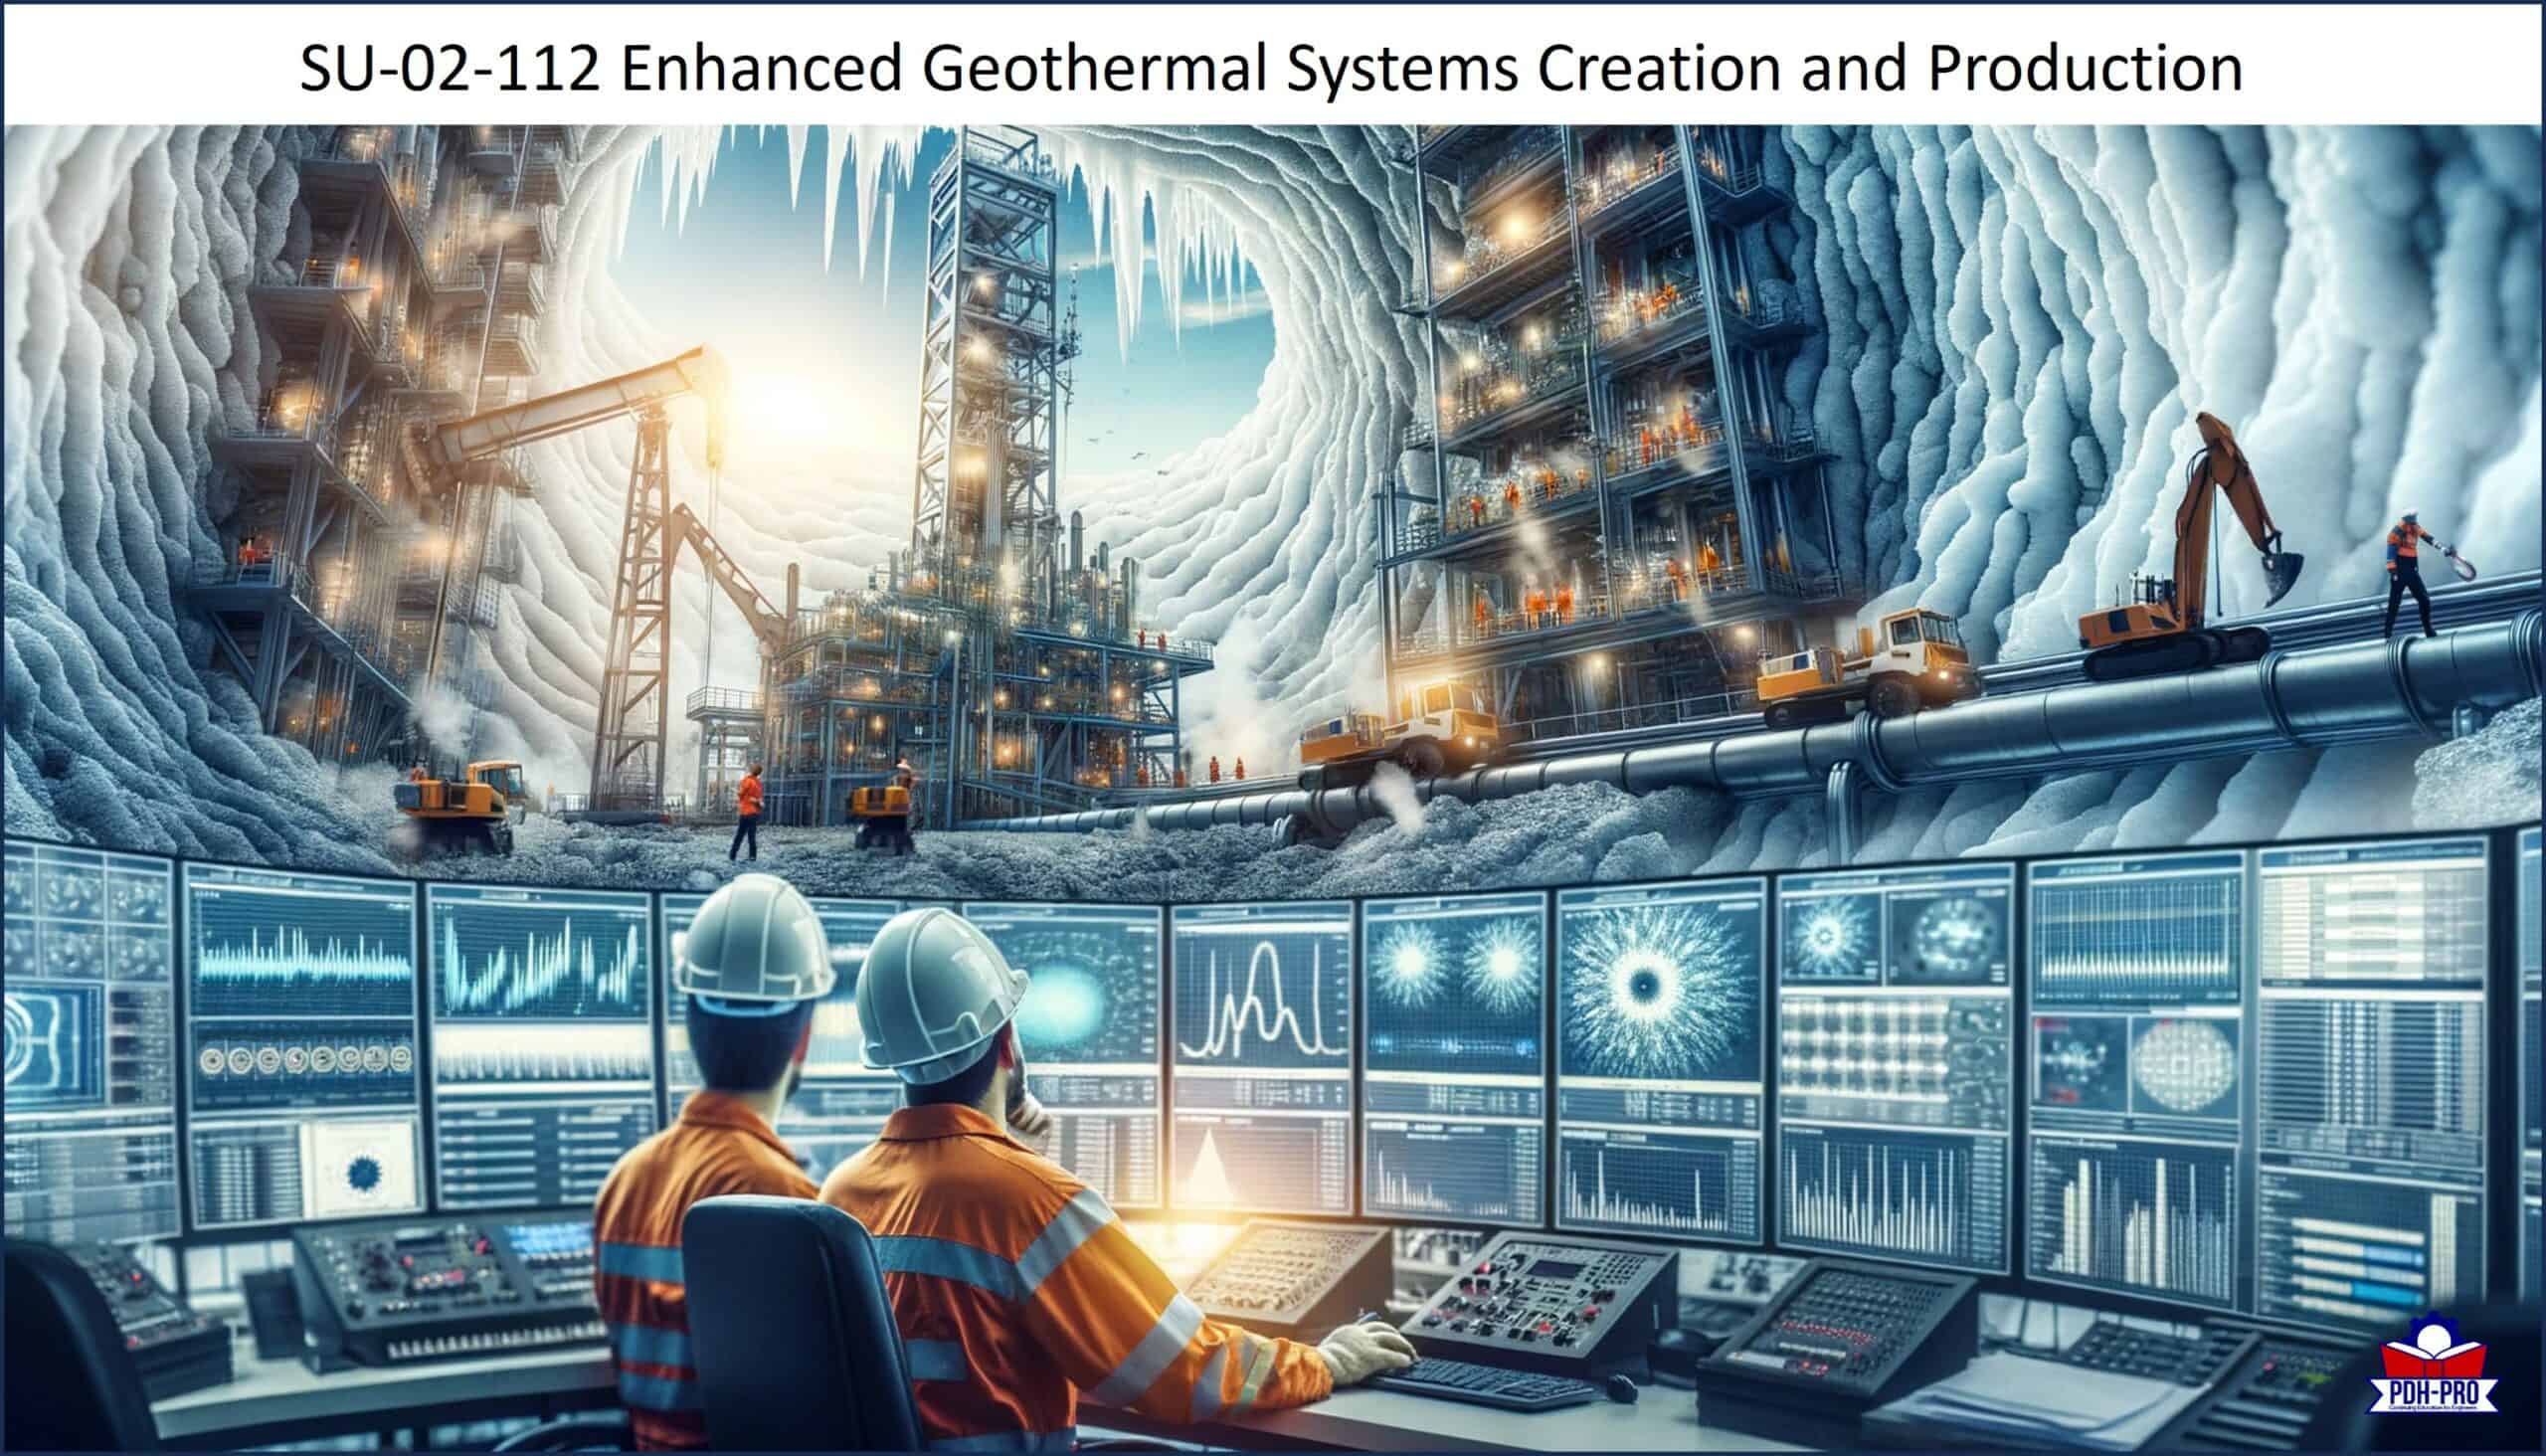 Enhanced Geothermal Systems Creation and Production